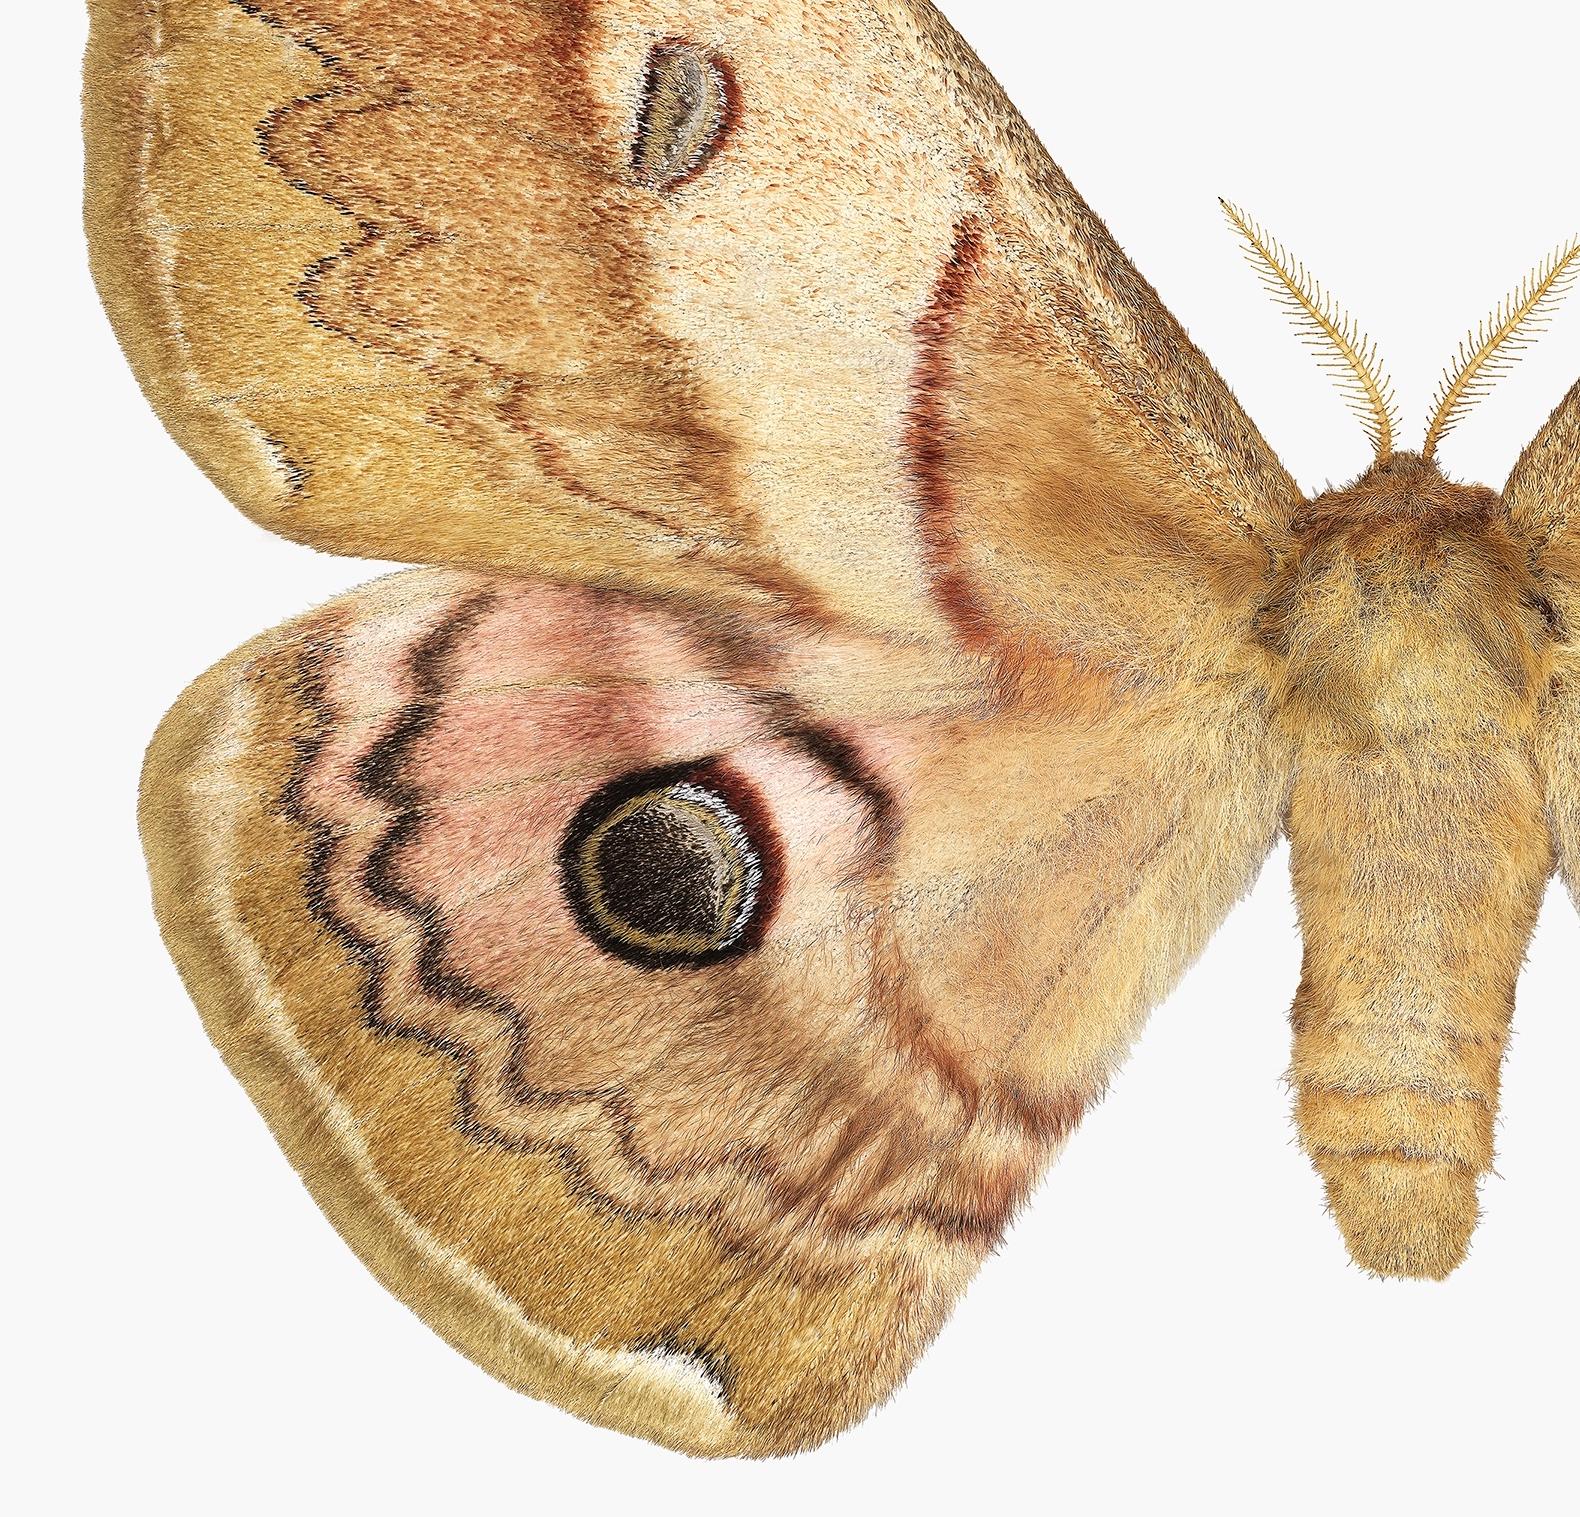 Caligula Japonica Female, Golden Brown, Ochre Moth White, Winged Insect Nature - Photograph by Joseph Scheer